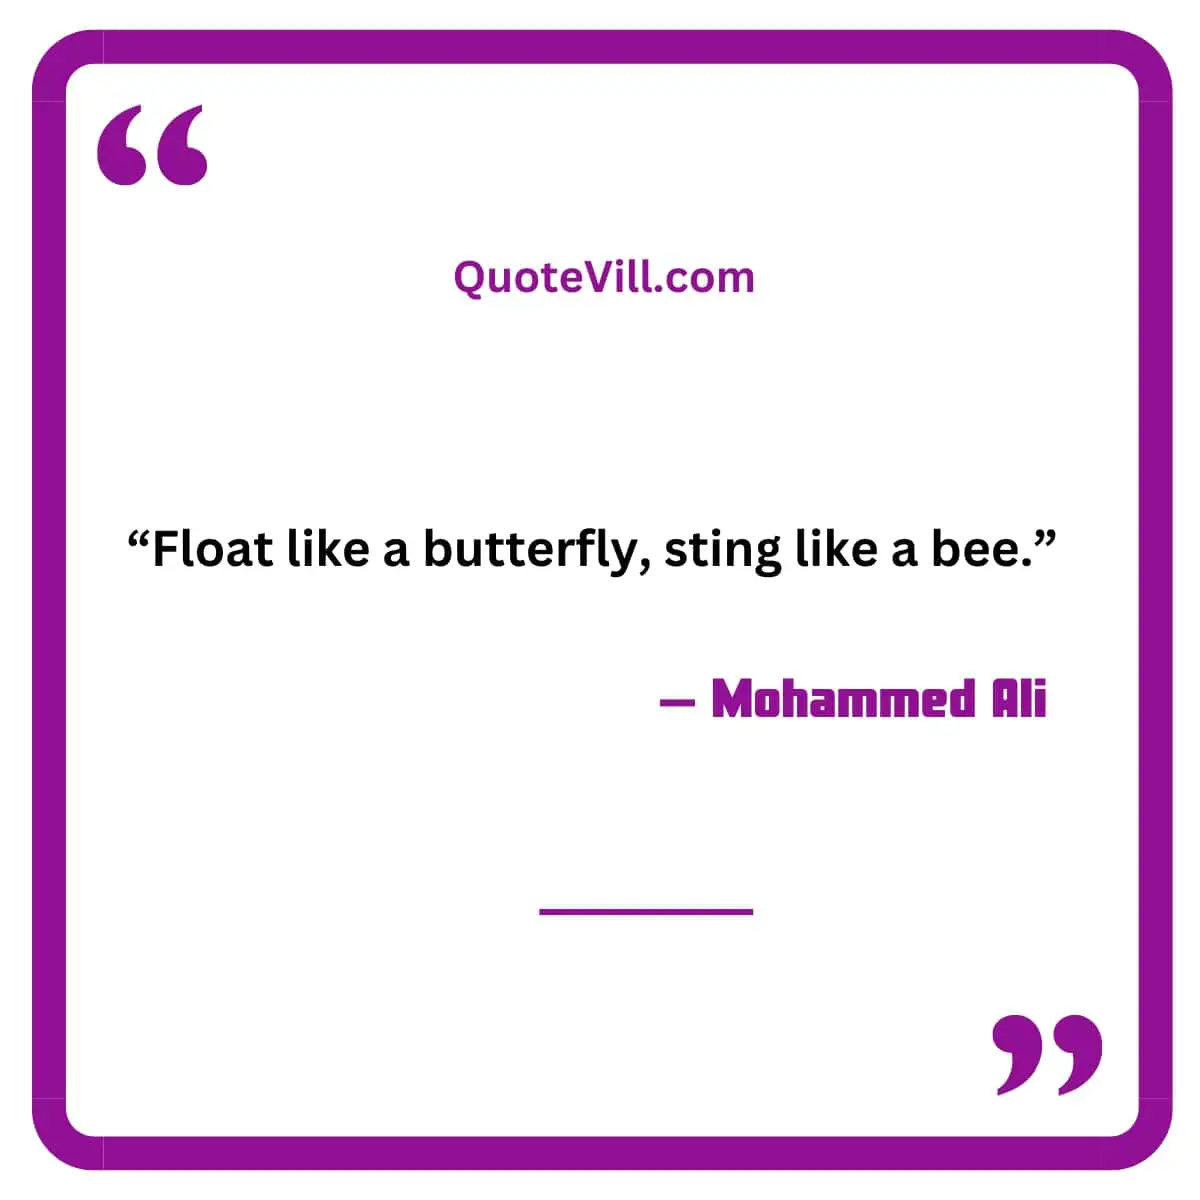 Mohammed Ali Quotes About Life 